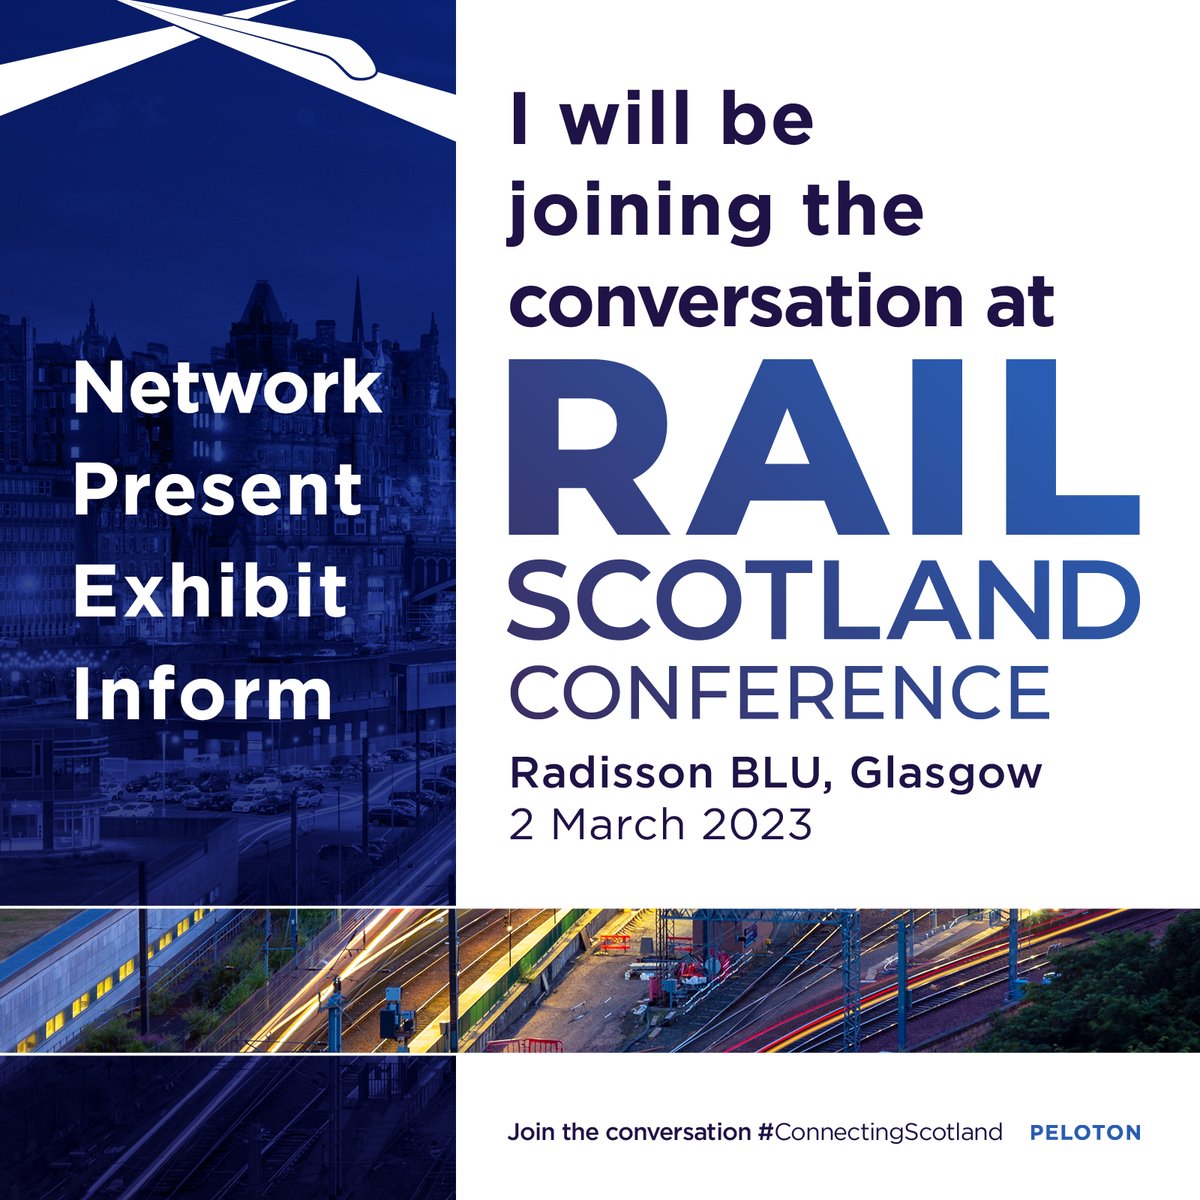 Inspiring start at the Rail Scotland Conference today in Glasgow. A great kick off from @JennyGilruth MSP - Minister for Transport, followed by @ReeveBill Director of Rail @transcotland who shared the vision for rail in Scotland. #connectingScotland #rail